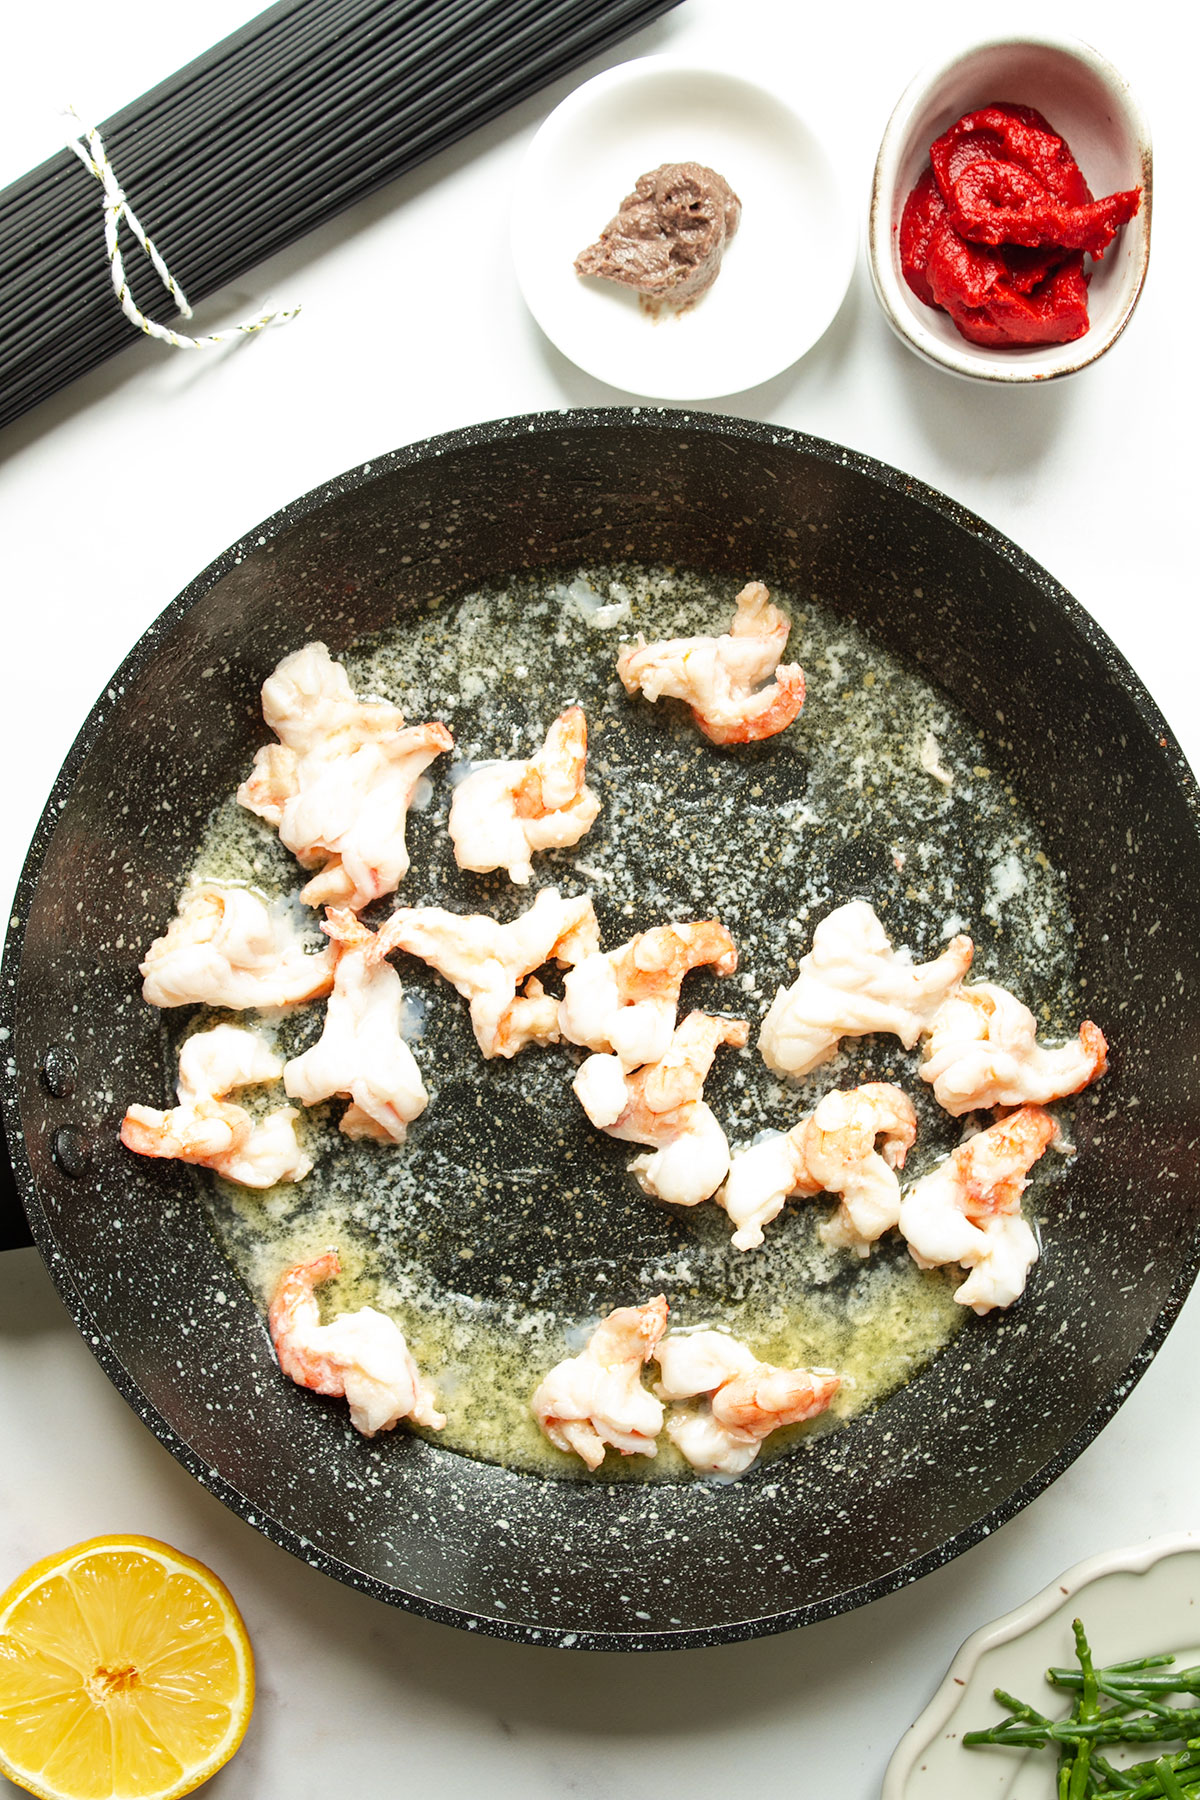 A pan of shrimps cooking for a few minutes until opaque with with small dishes contaning samphire, tomato puree and anchovy paste and a half lemon.